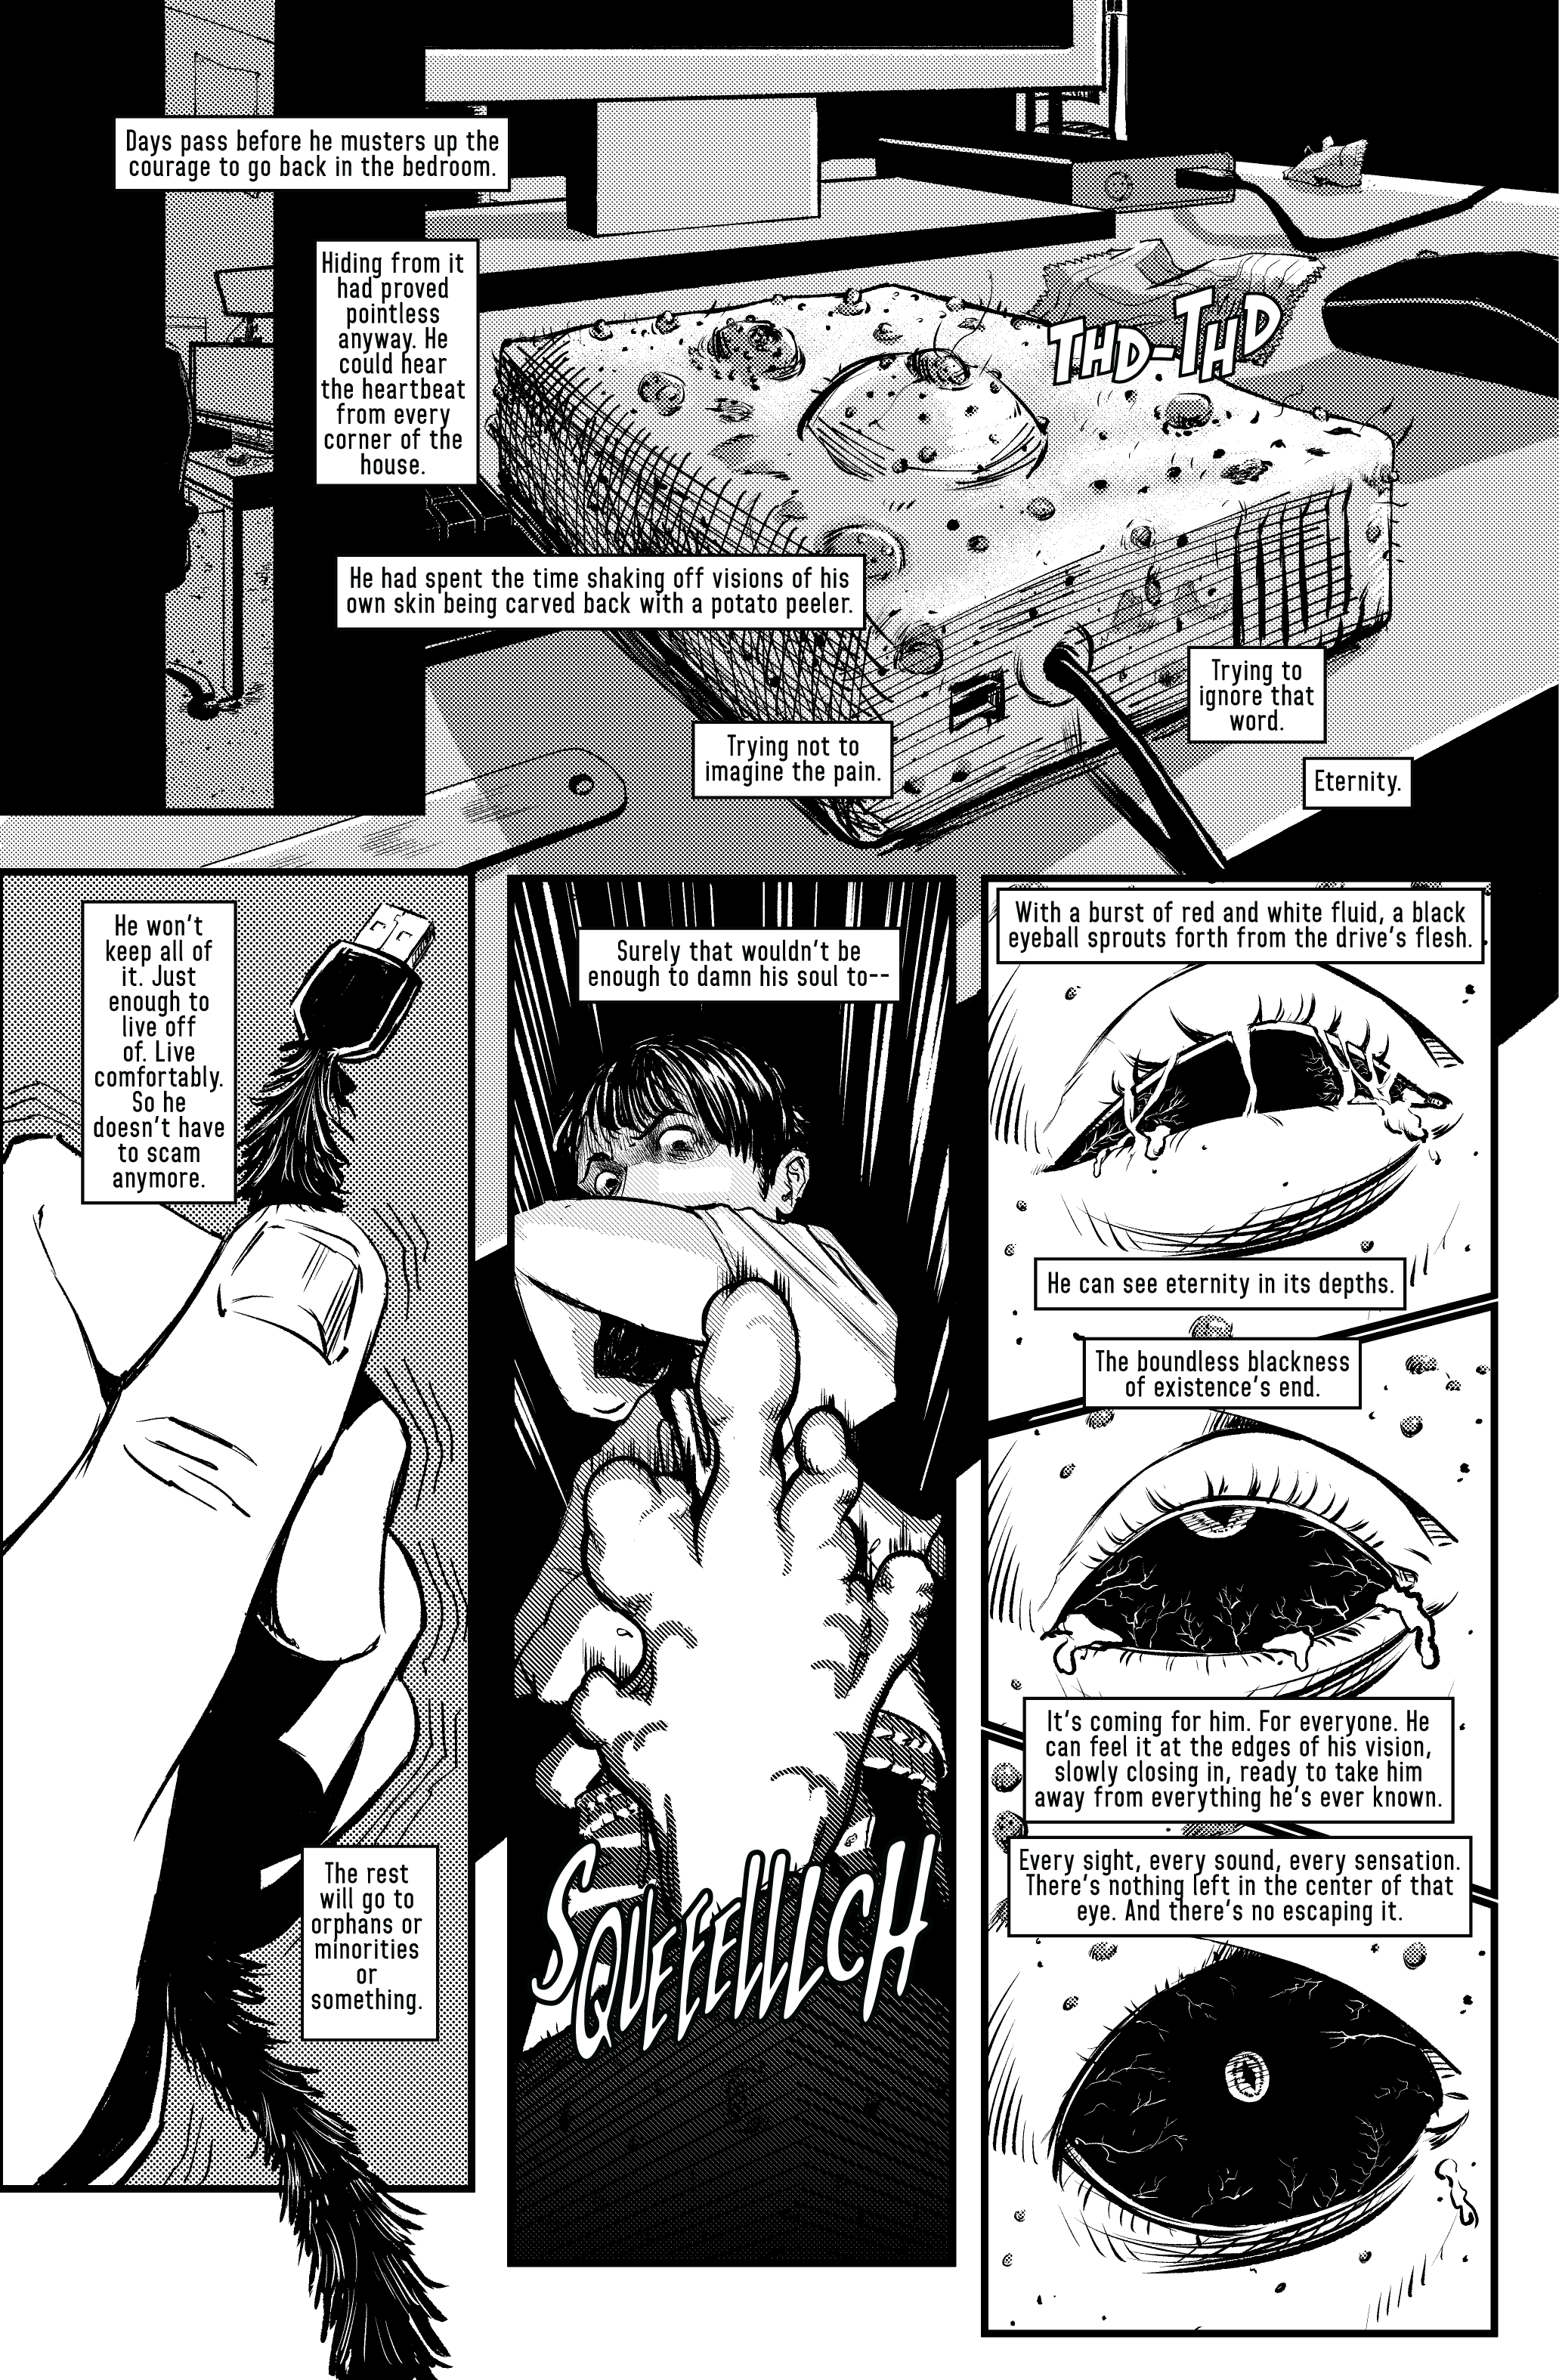 Monocul issue 07 story 01 pg 07 - Tales From The Crypto-01.png